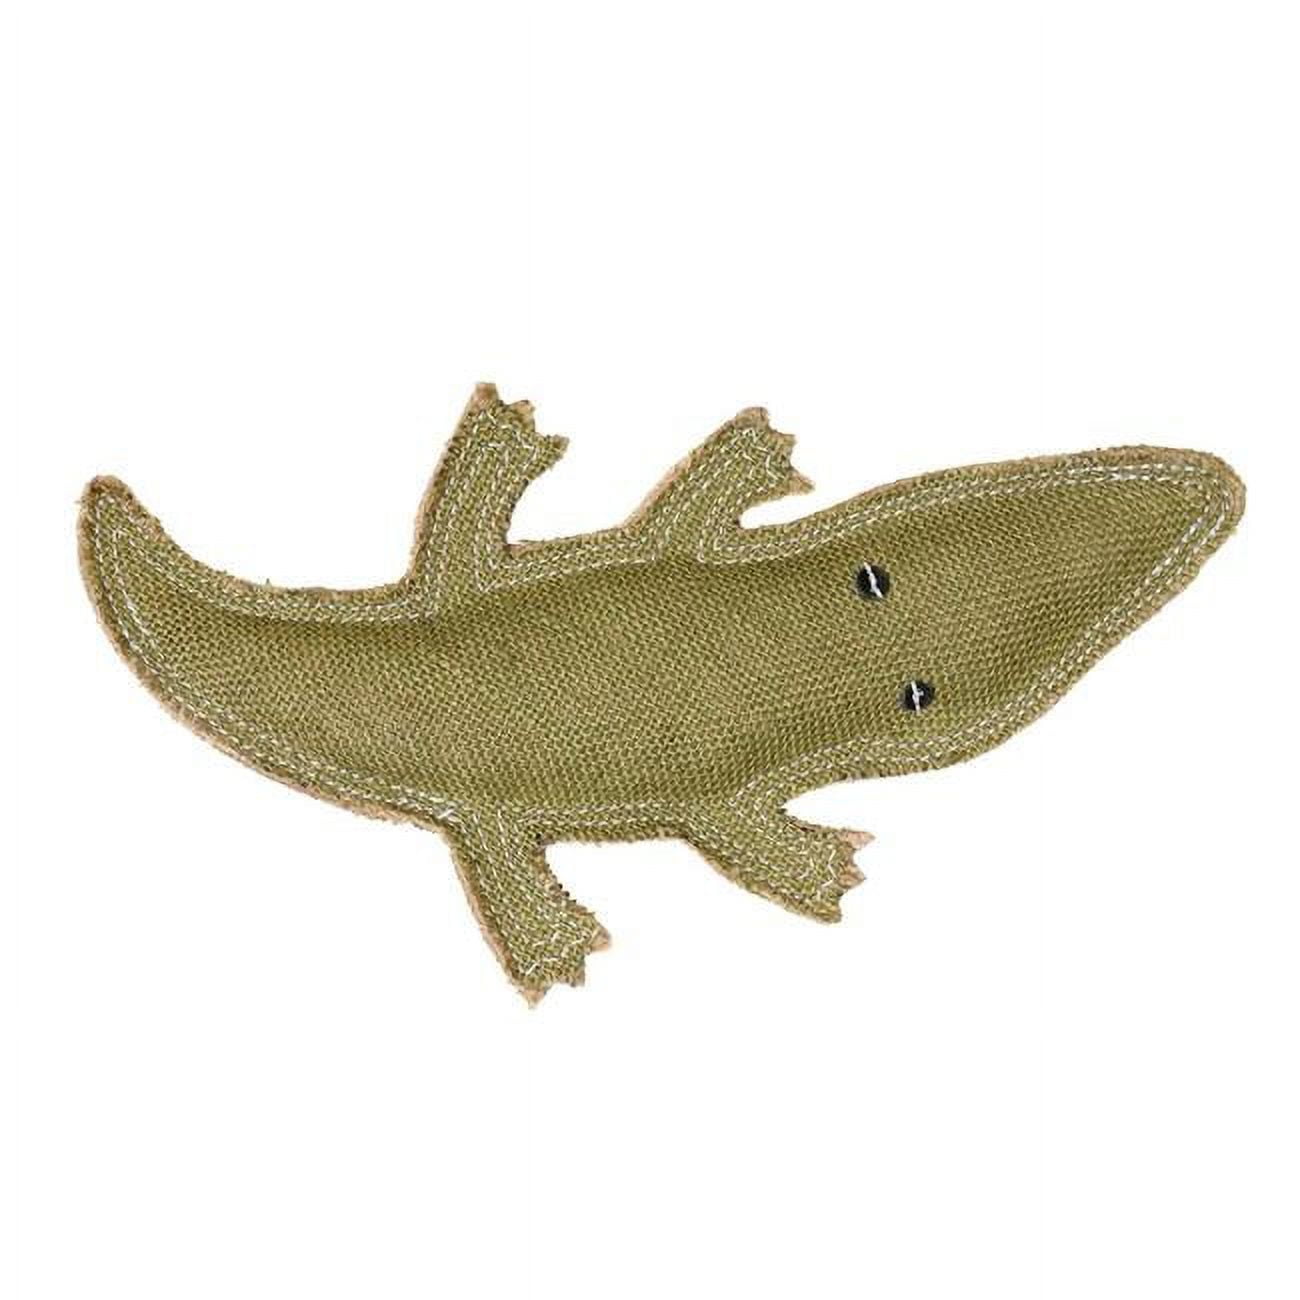 Dog Owners Outdoor Gear 890392 Cory Croc Dog Toy, Green